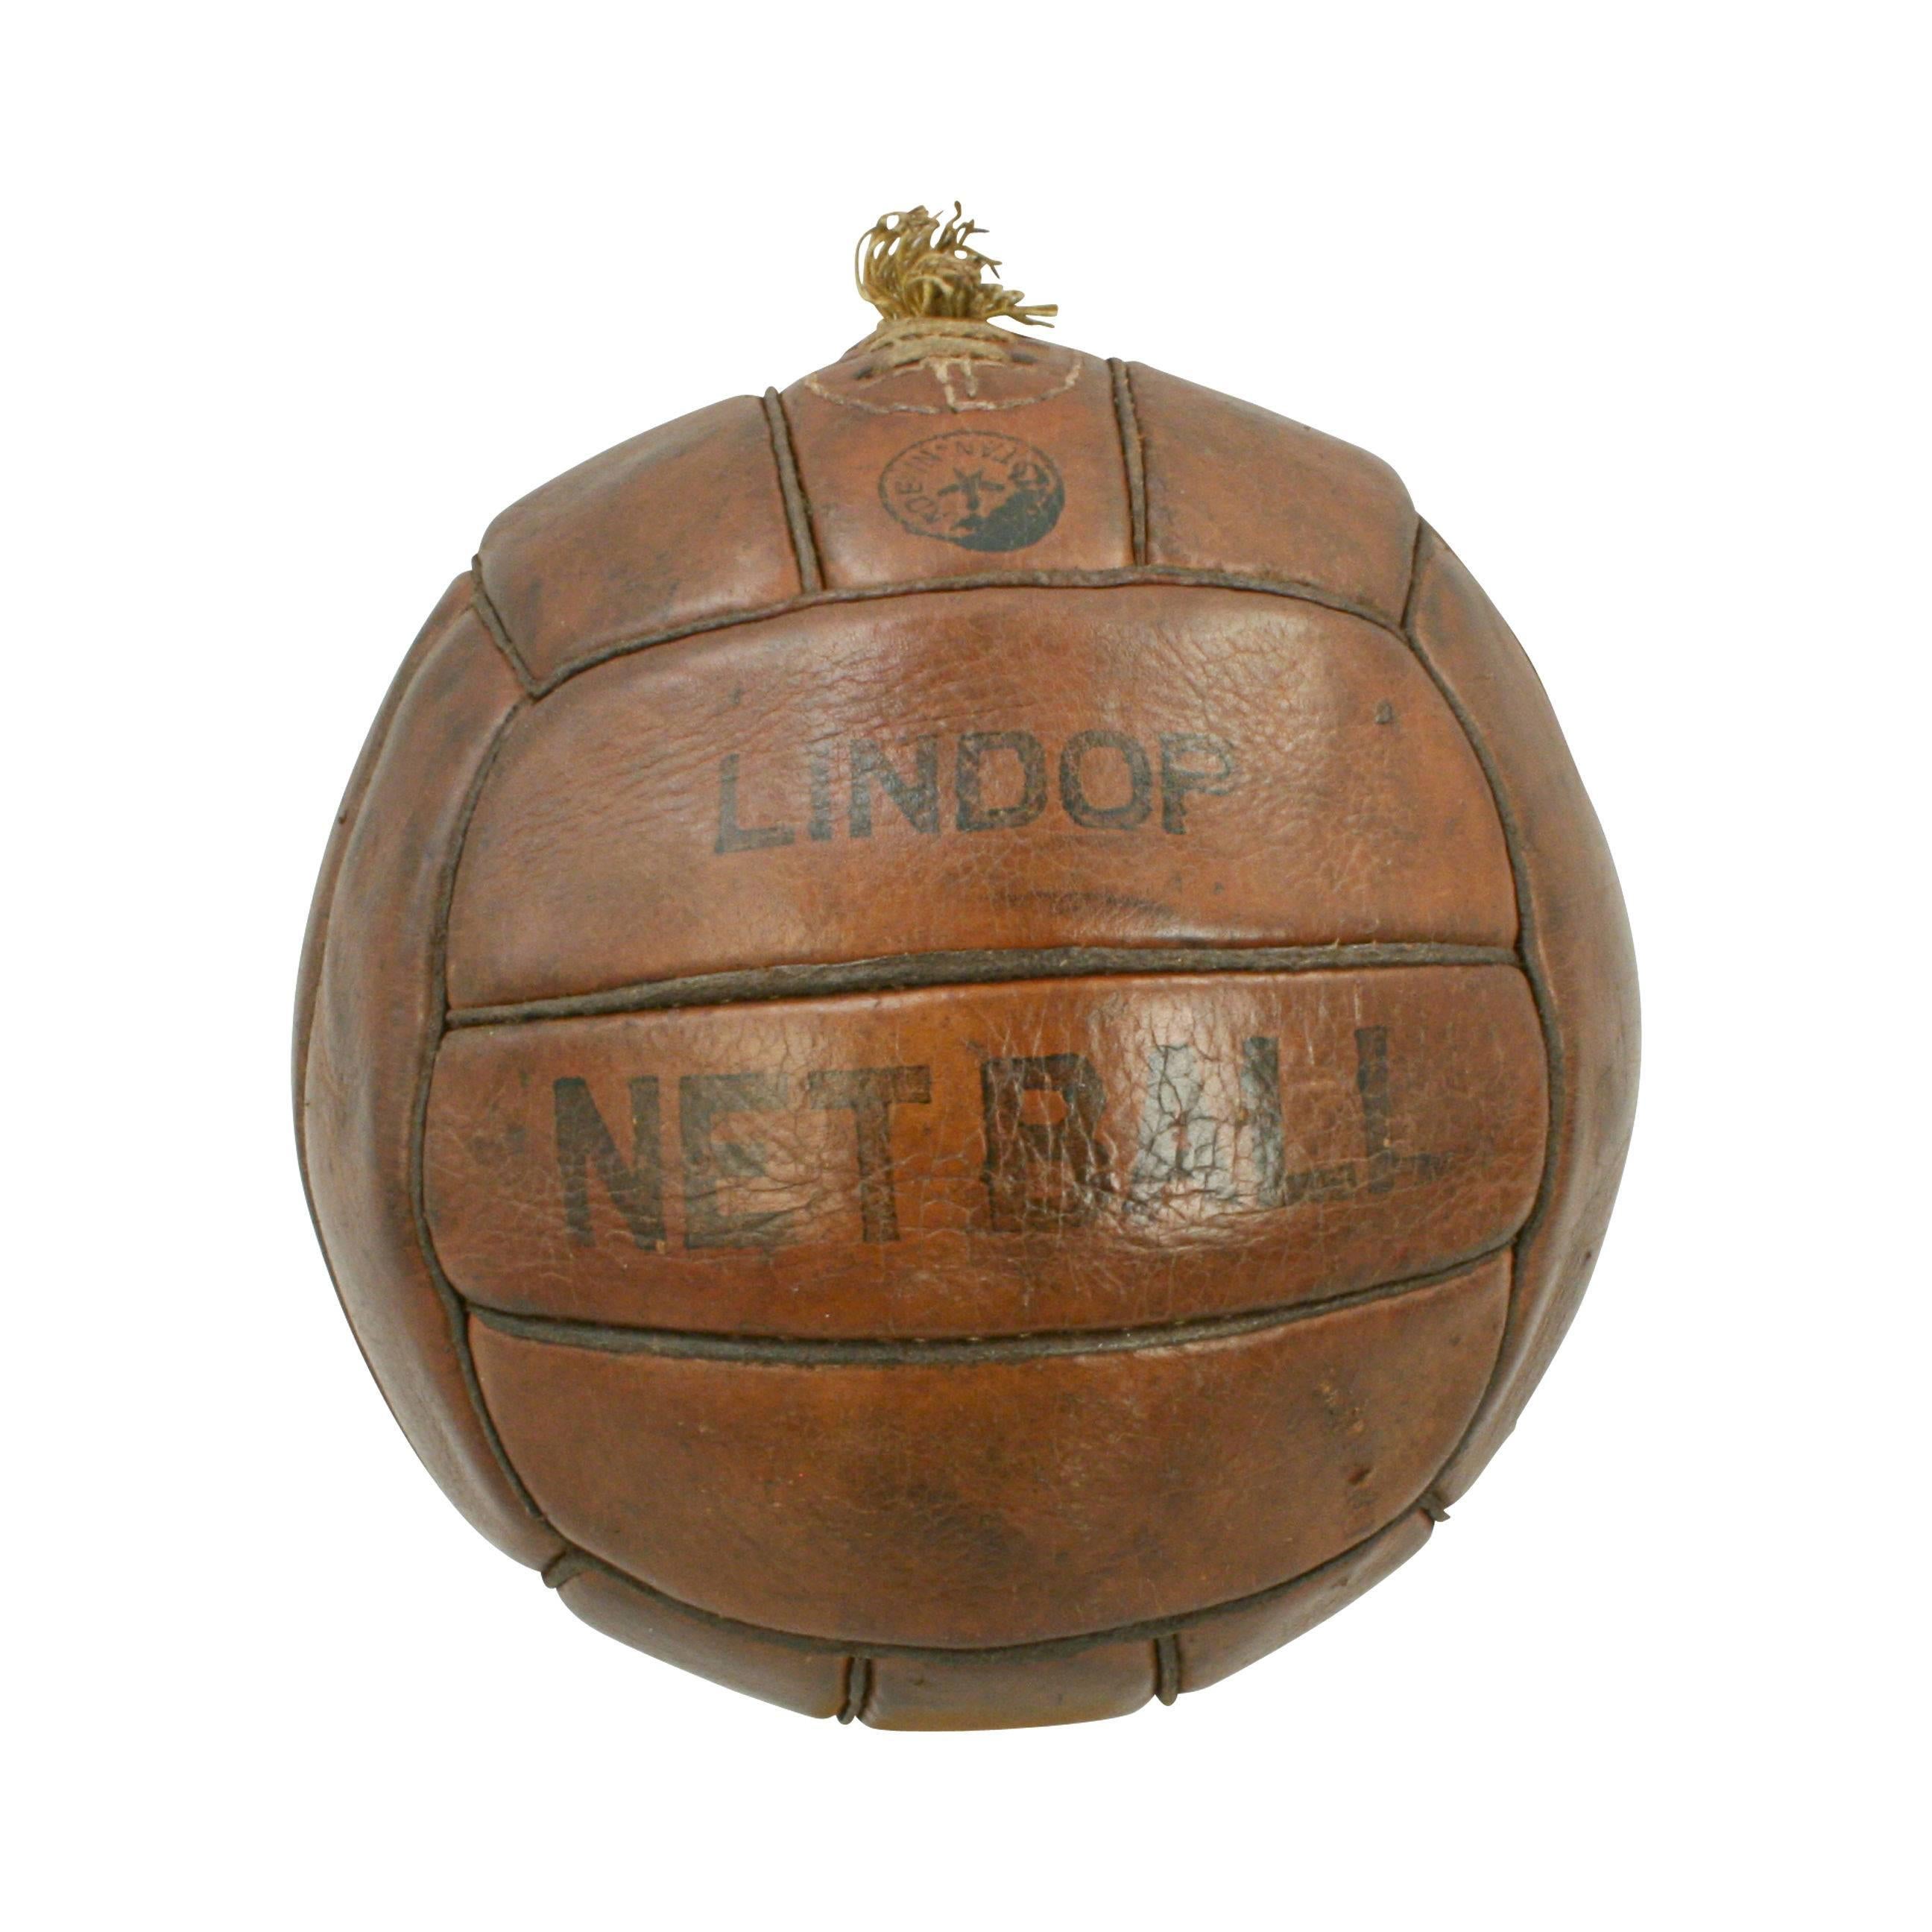 Vintage leather lindop netball. 
A traditional 18-panel tan leather netball ball in very good original condition. The ball has a lace-up slit to the top to enable bladder inflation or replacement. The ball is very similar to a football except that